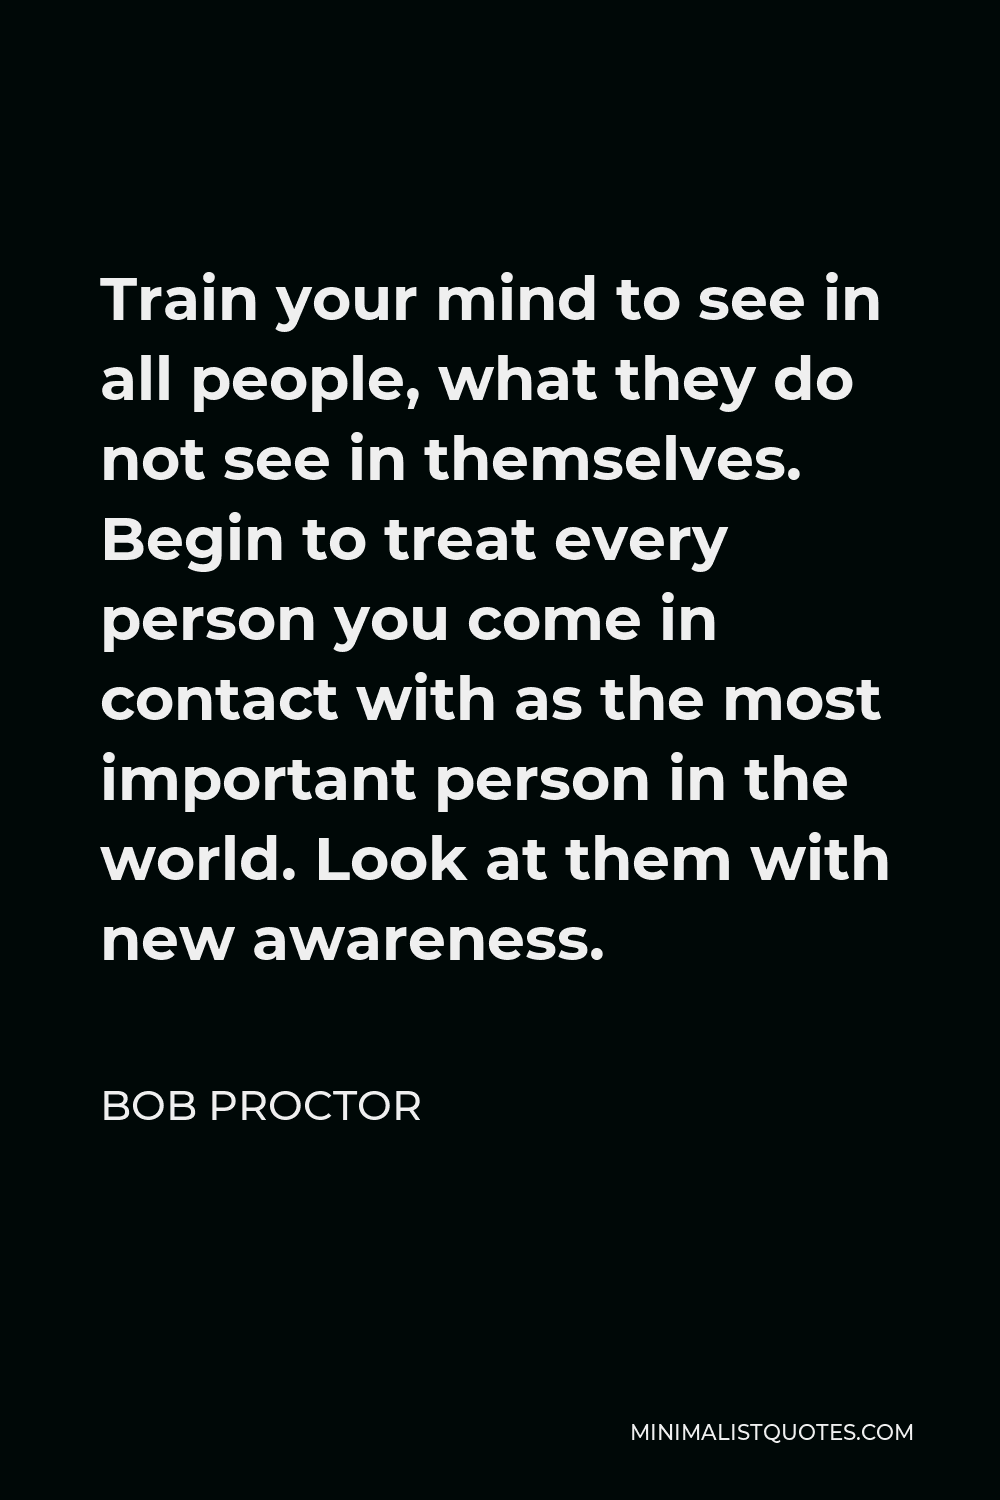 Bob Proctor Quote - Train your mind to see in all people, what they do not see in themselves. Begin to treat every person you come in contact with as the most important person in the world. Look at them with new awareness.